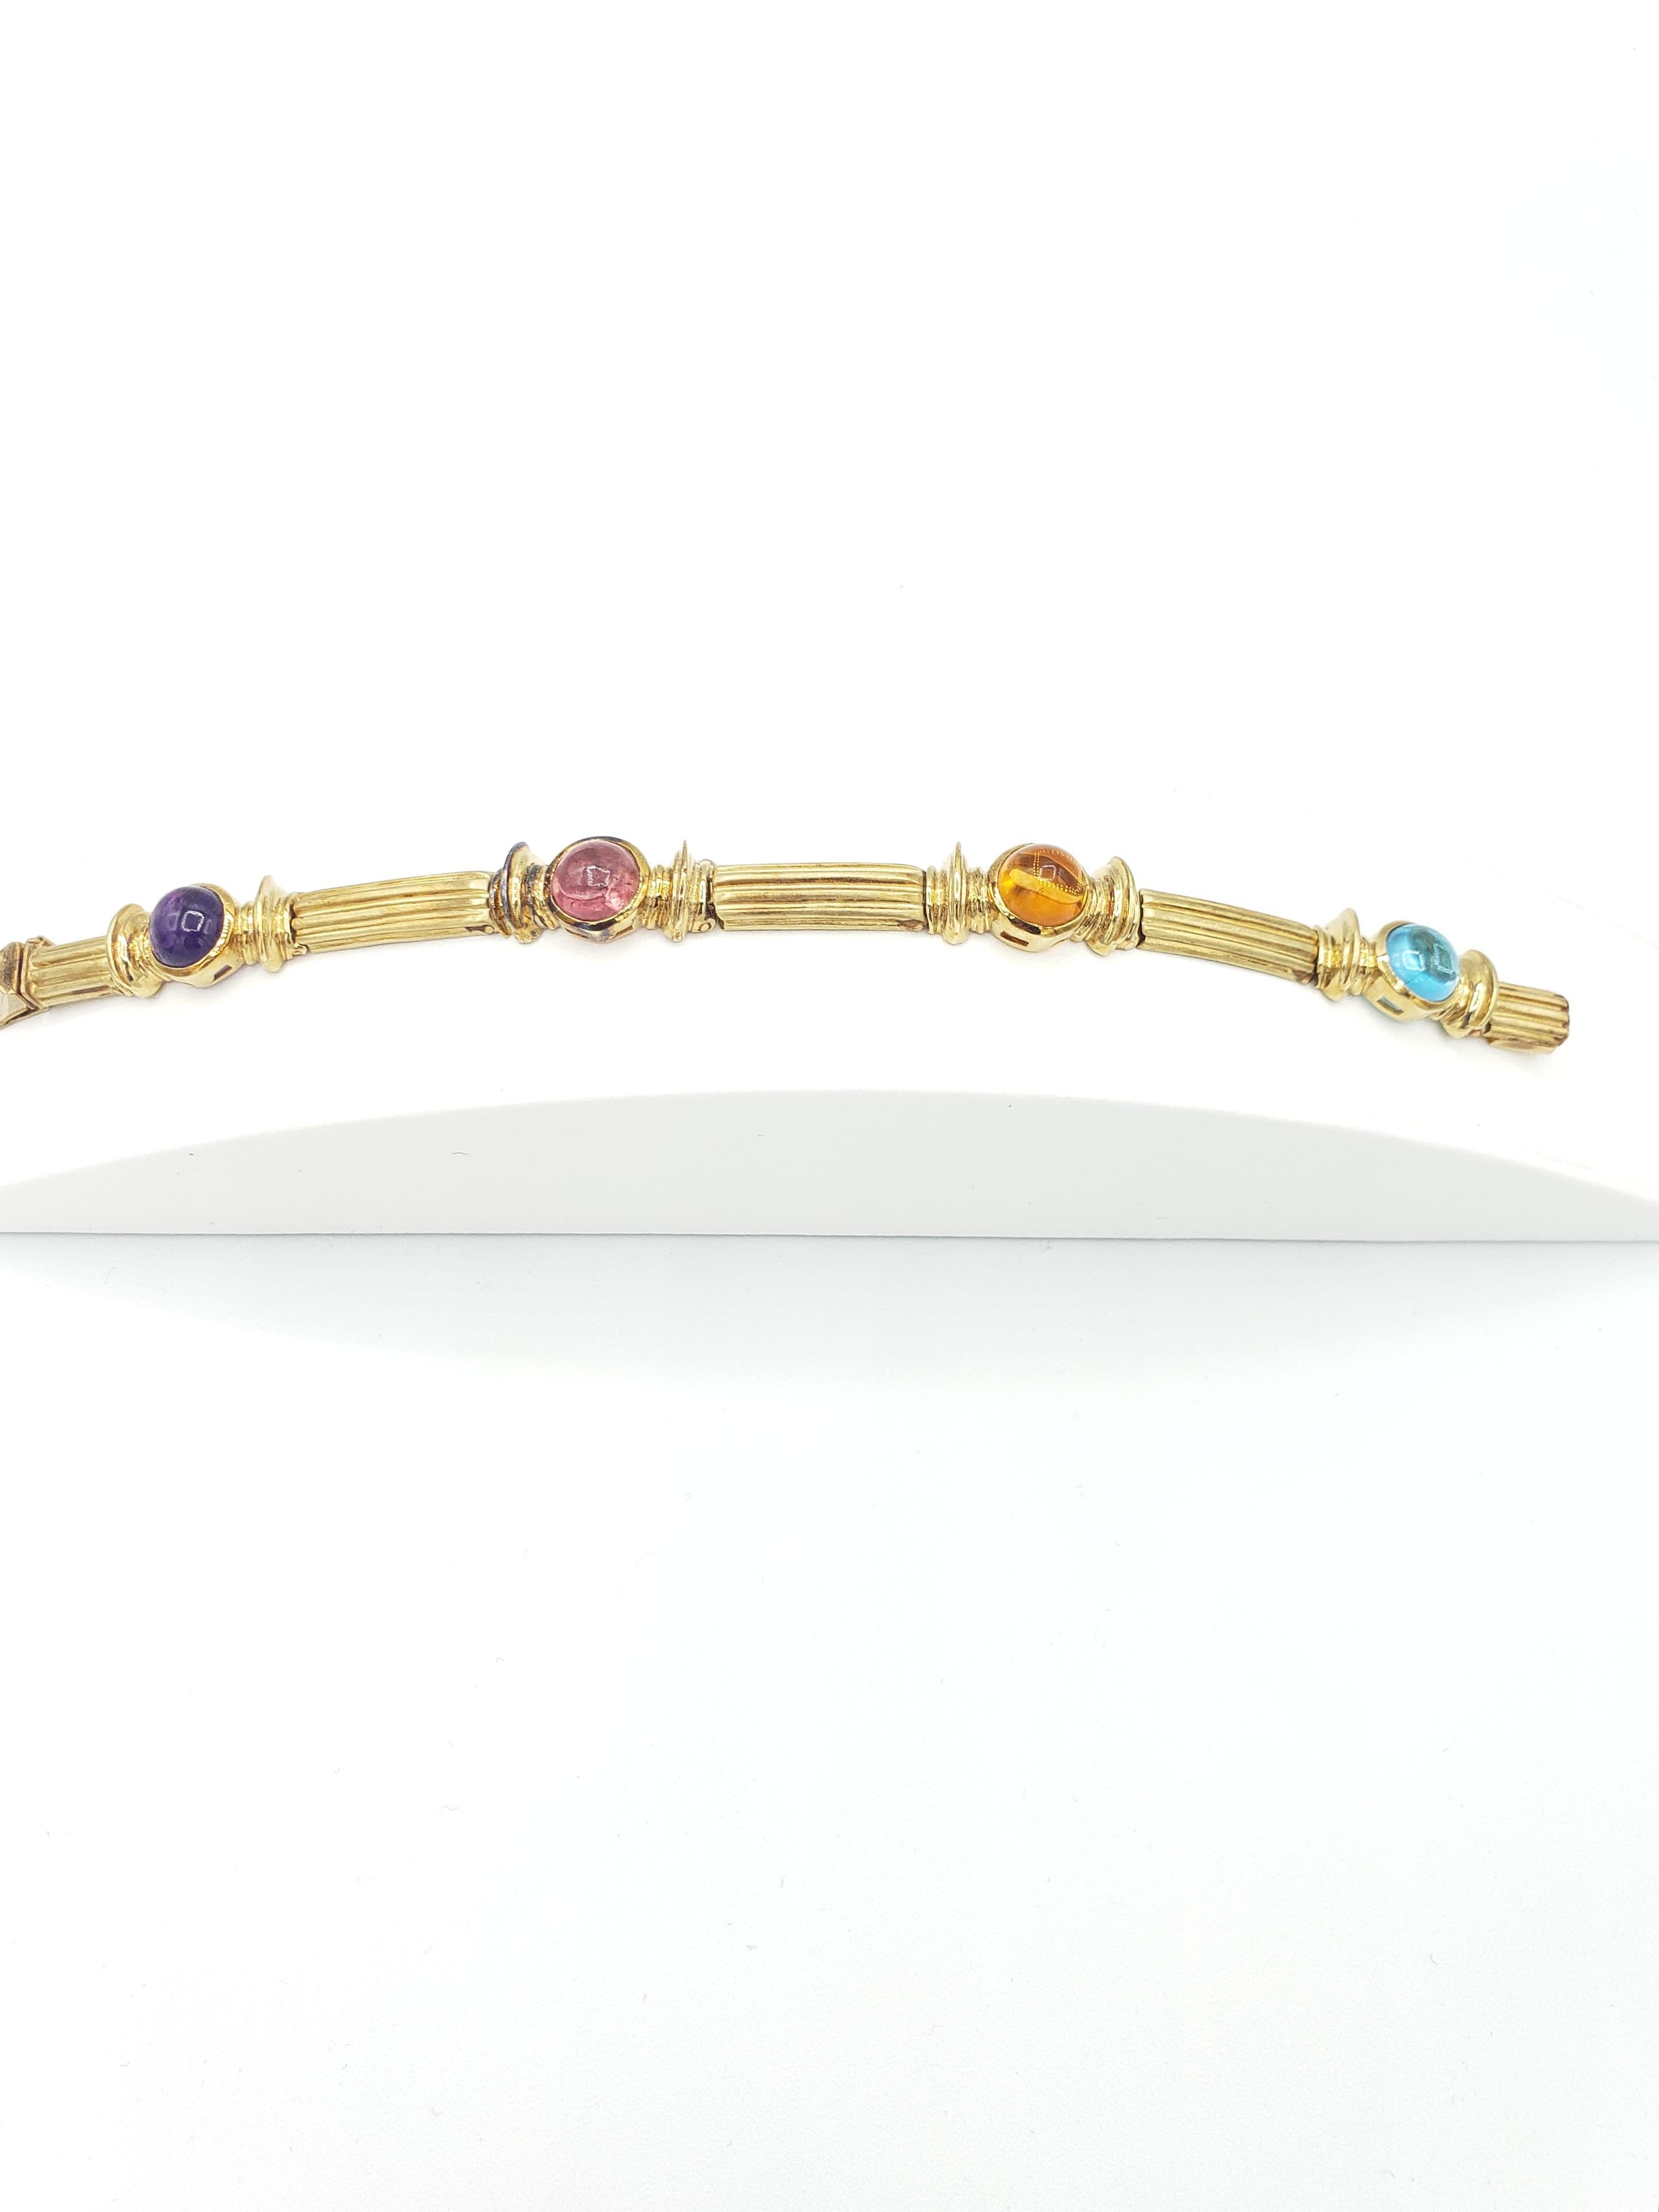 Oval Cut NEW Blue and Pink Tourmaline, Amethyst, Citrine Bracelet in 14k Yellow Gold For Sale